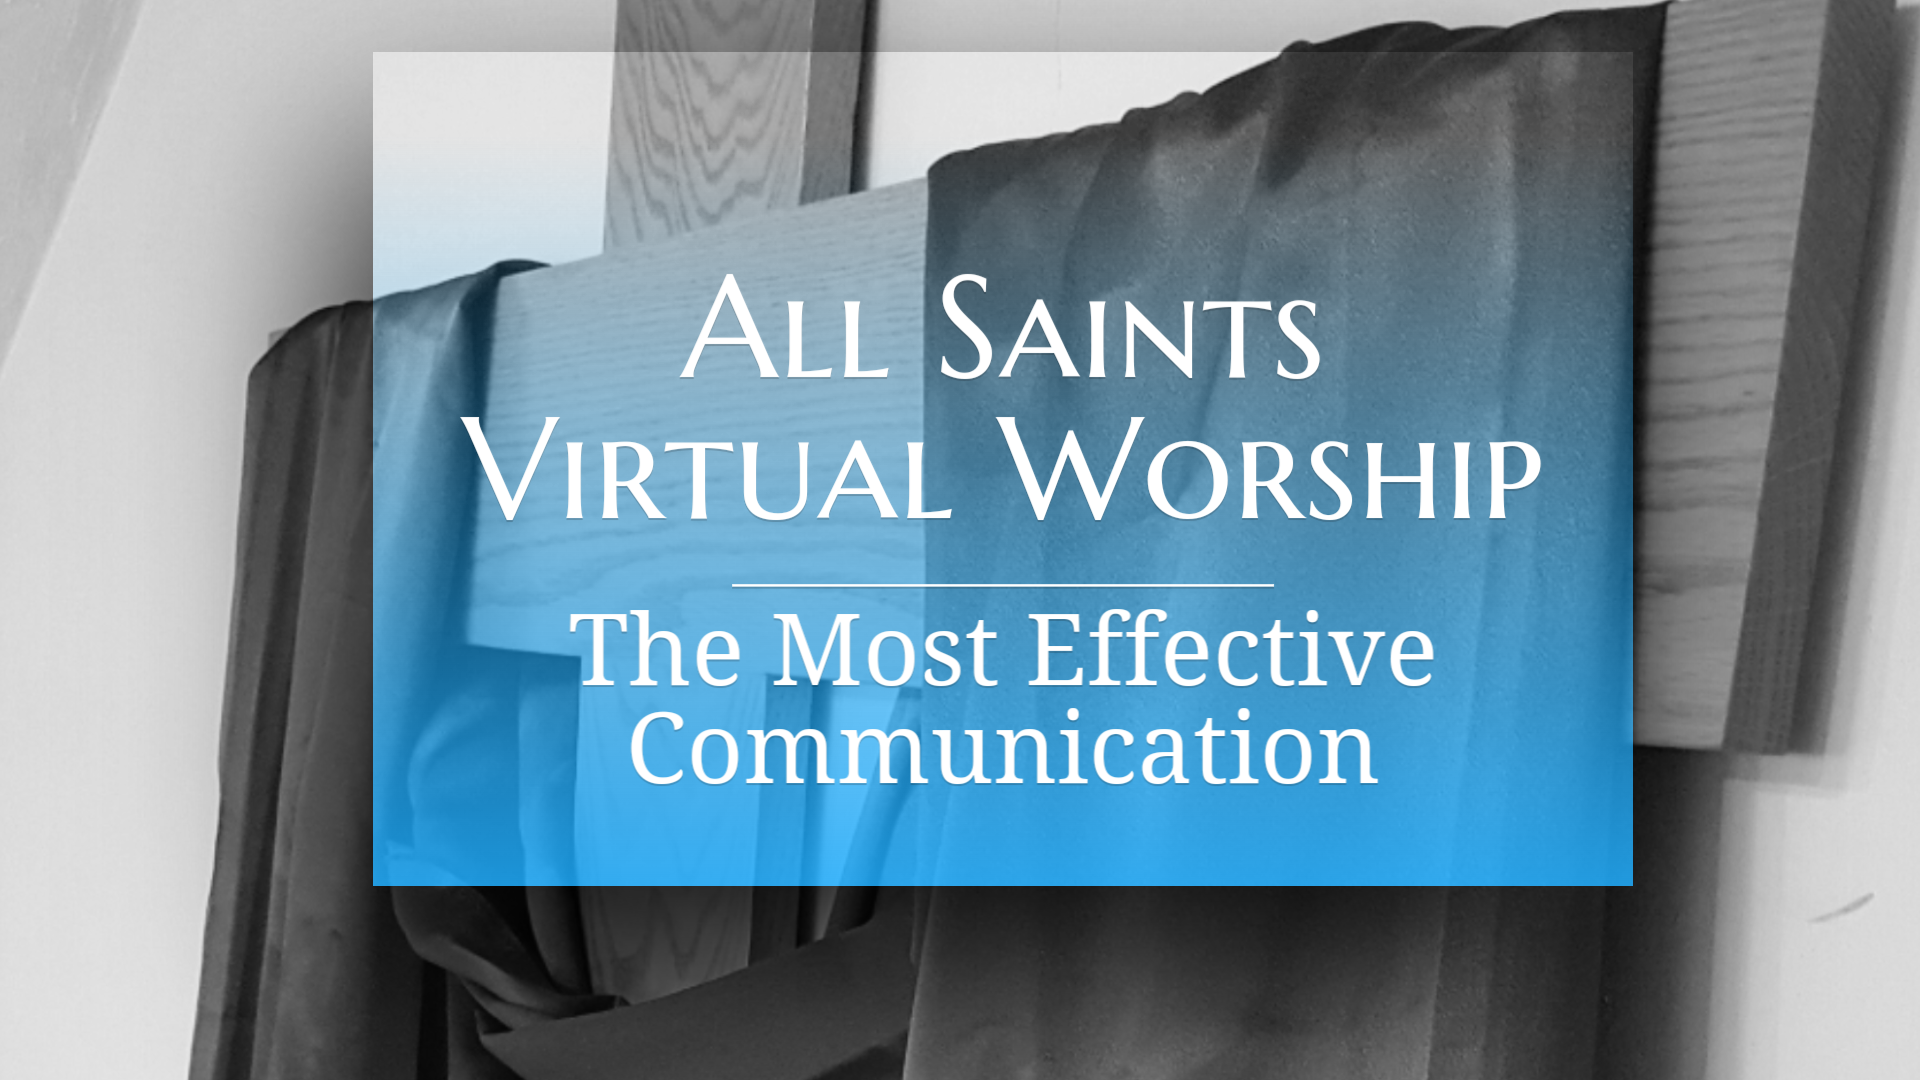 All Saints Virtual Worship - The Most Effective Communication